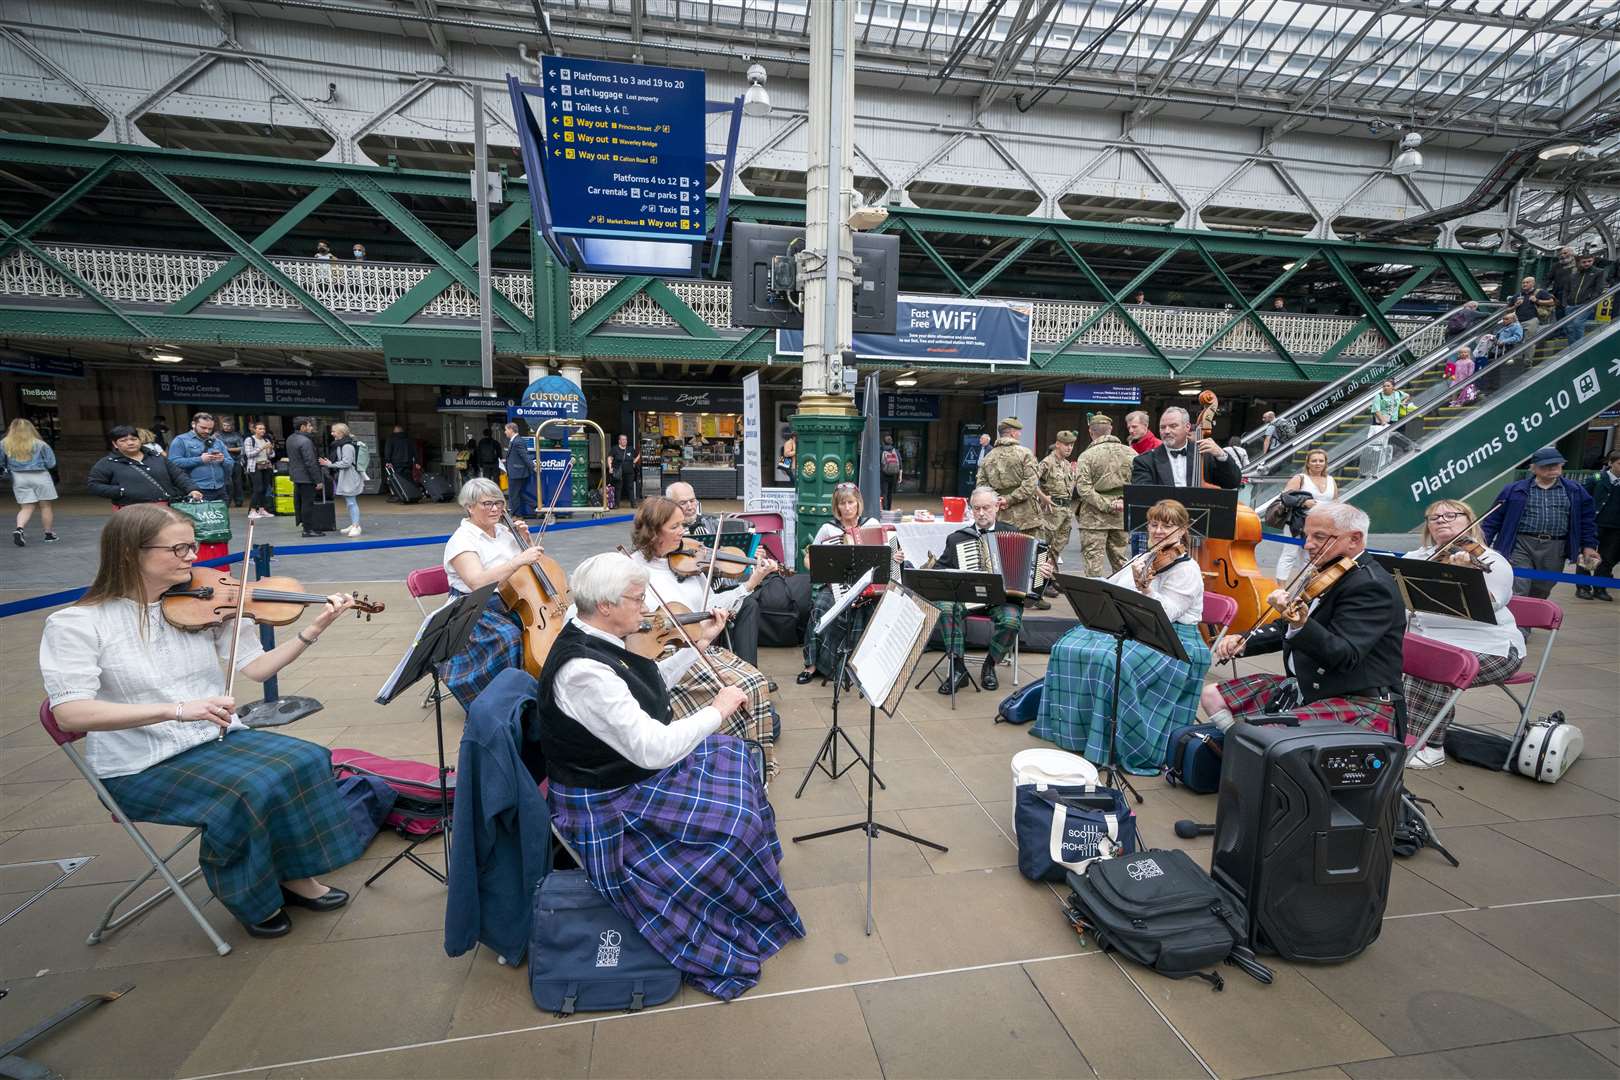 Members of the Scottish Fiddle Orchestra play in a pop-up performance at Edinburgh’s Waverley Station (Jane Barlow/PA)